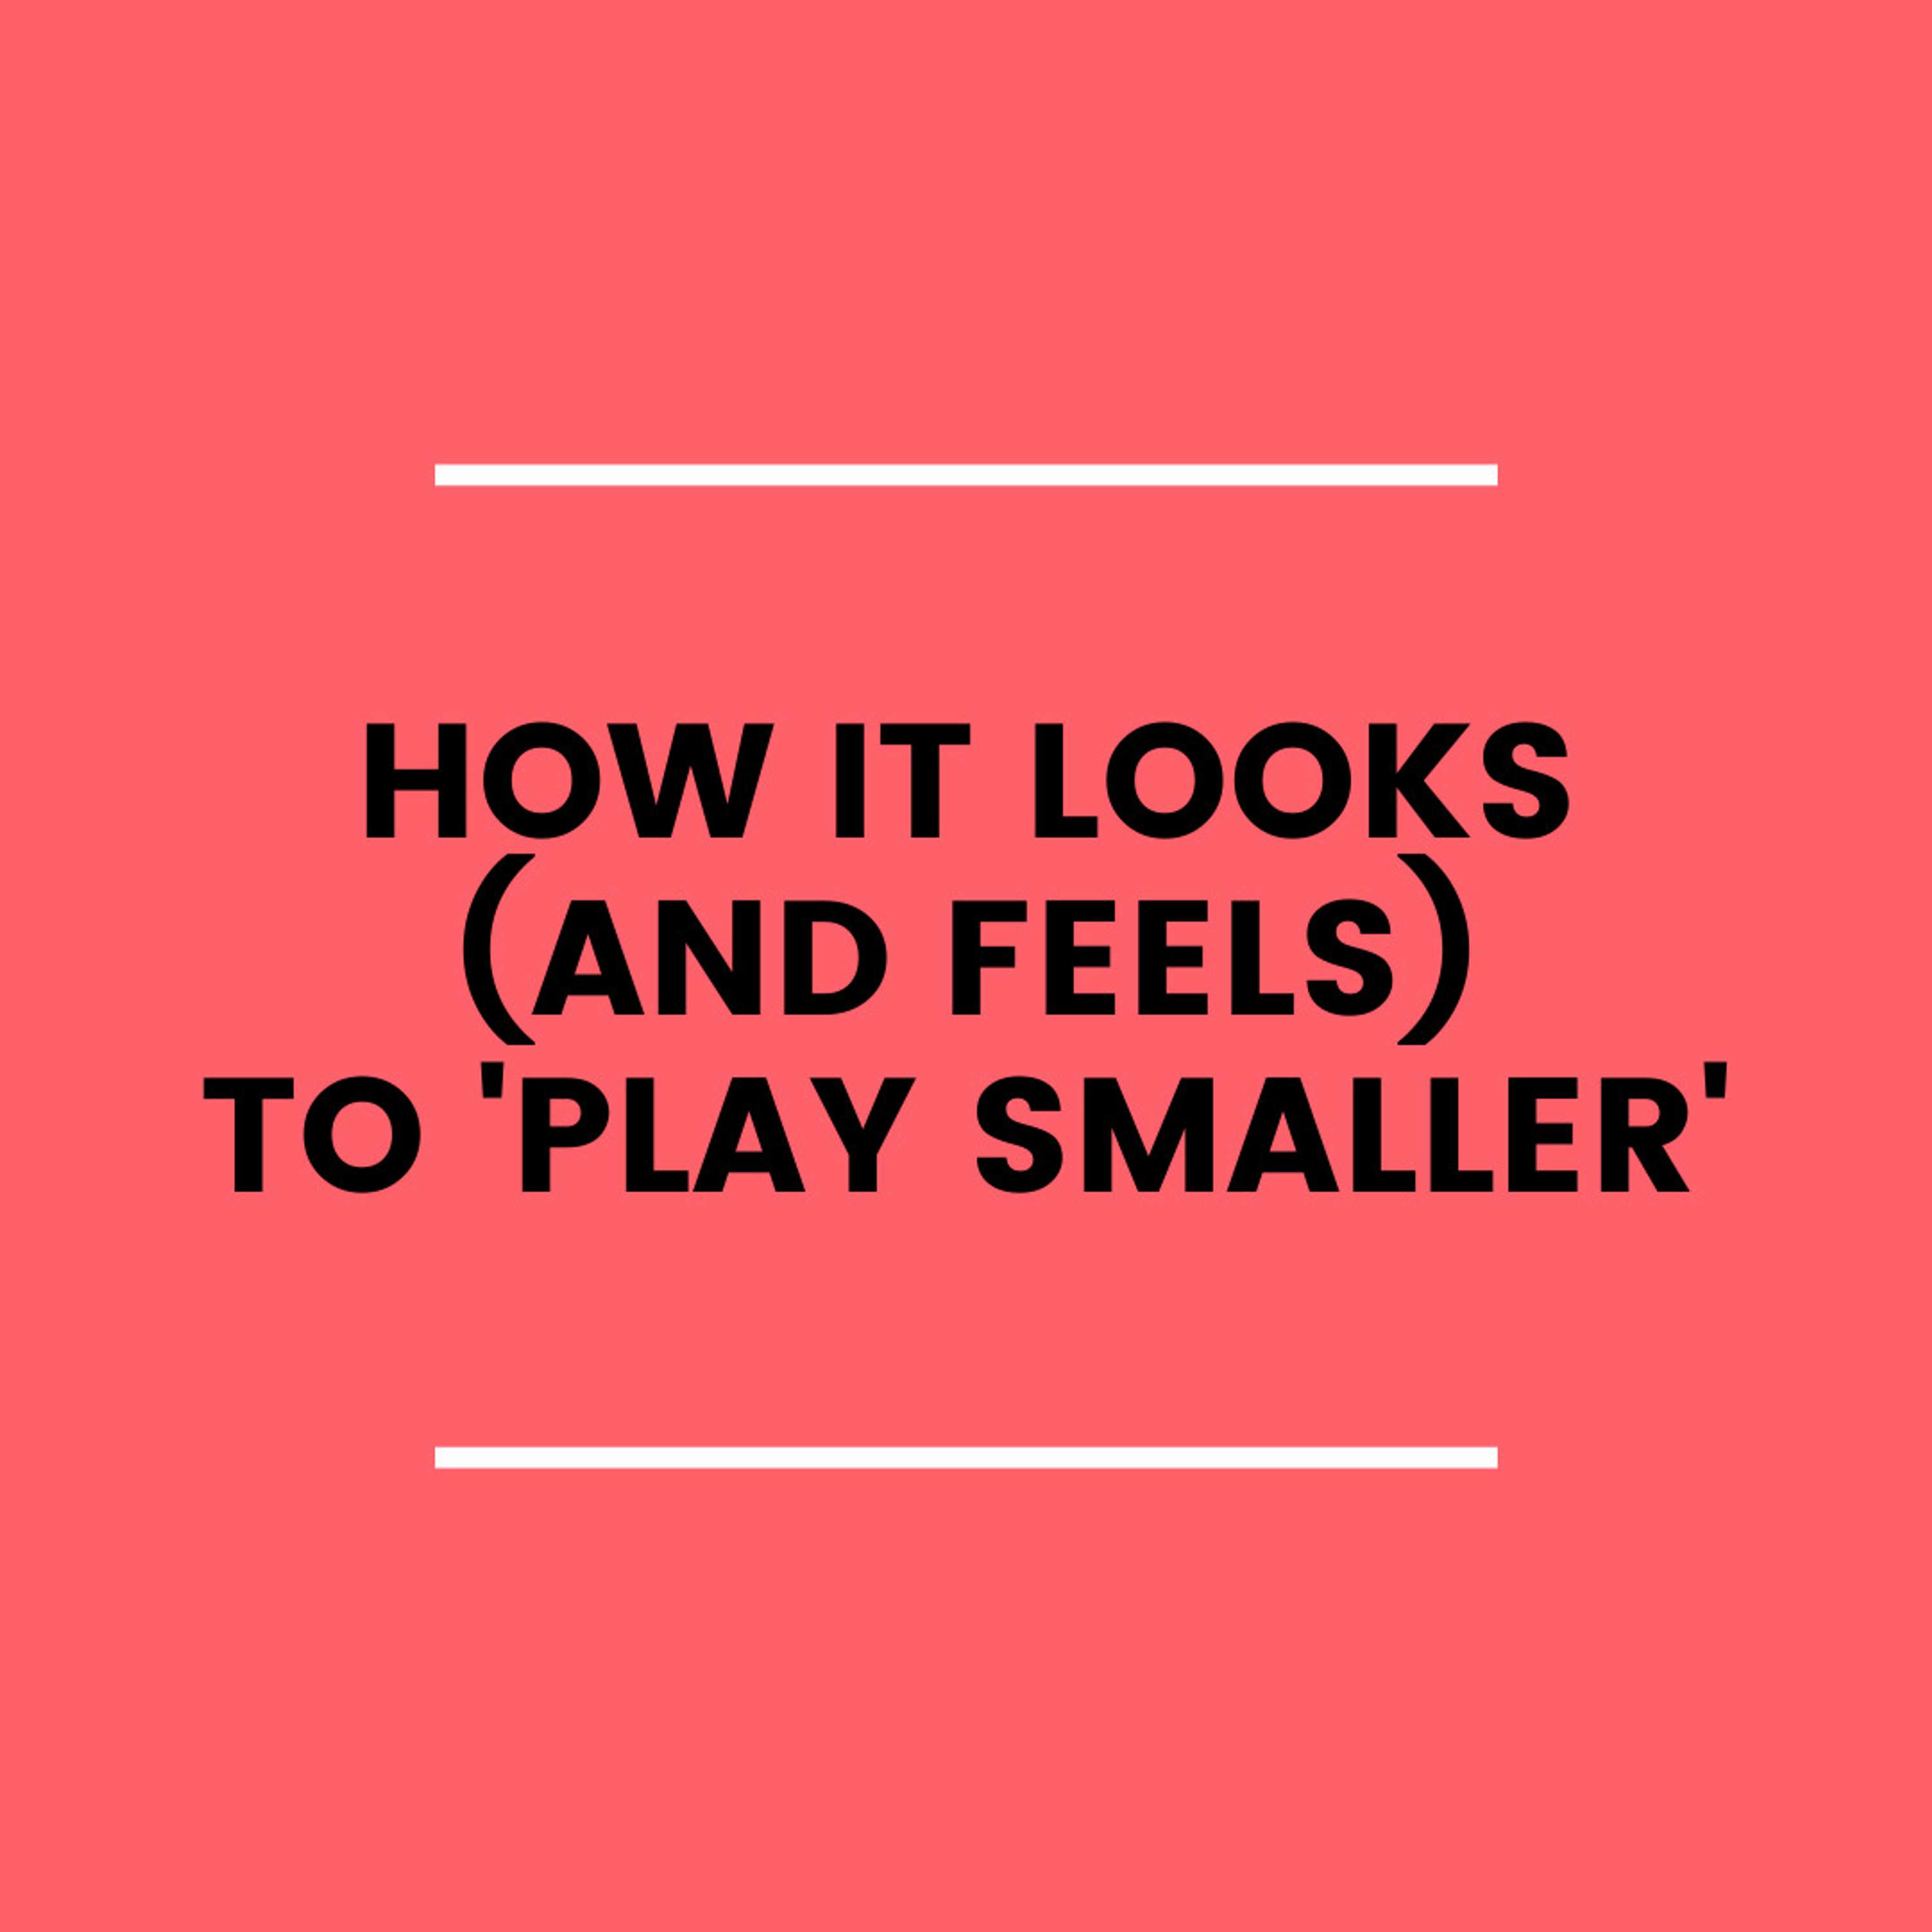 19. How it Looks (and Feels) to ’Play Smaller’